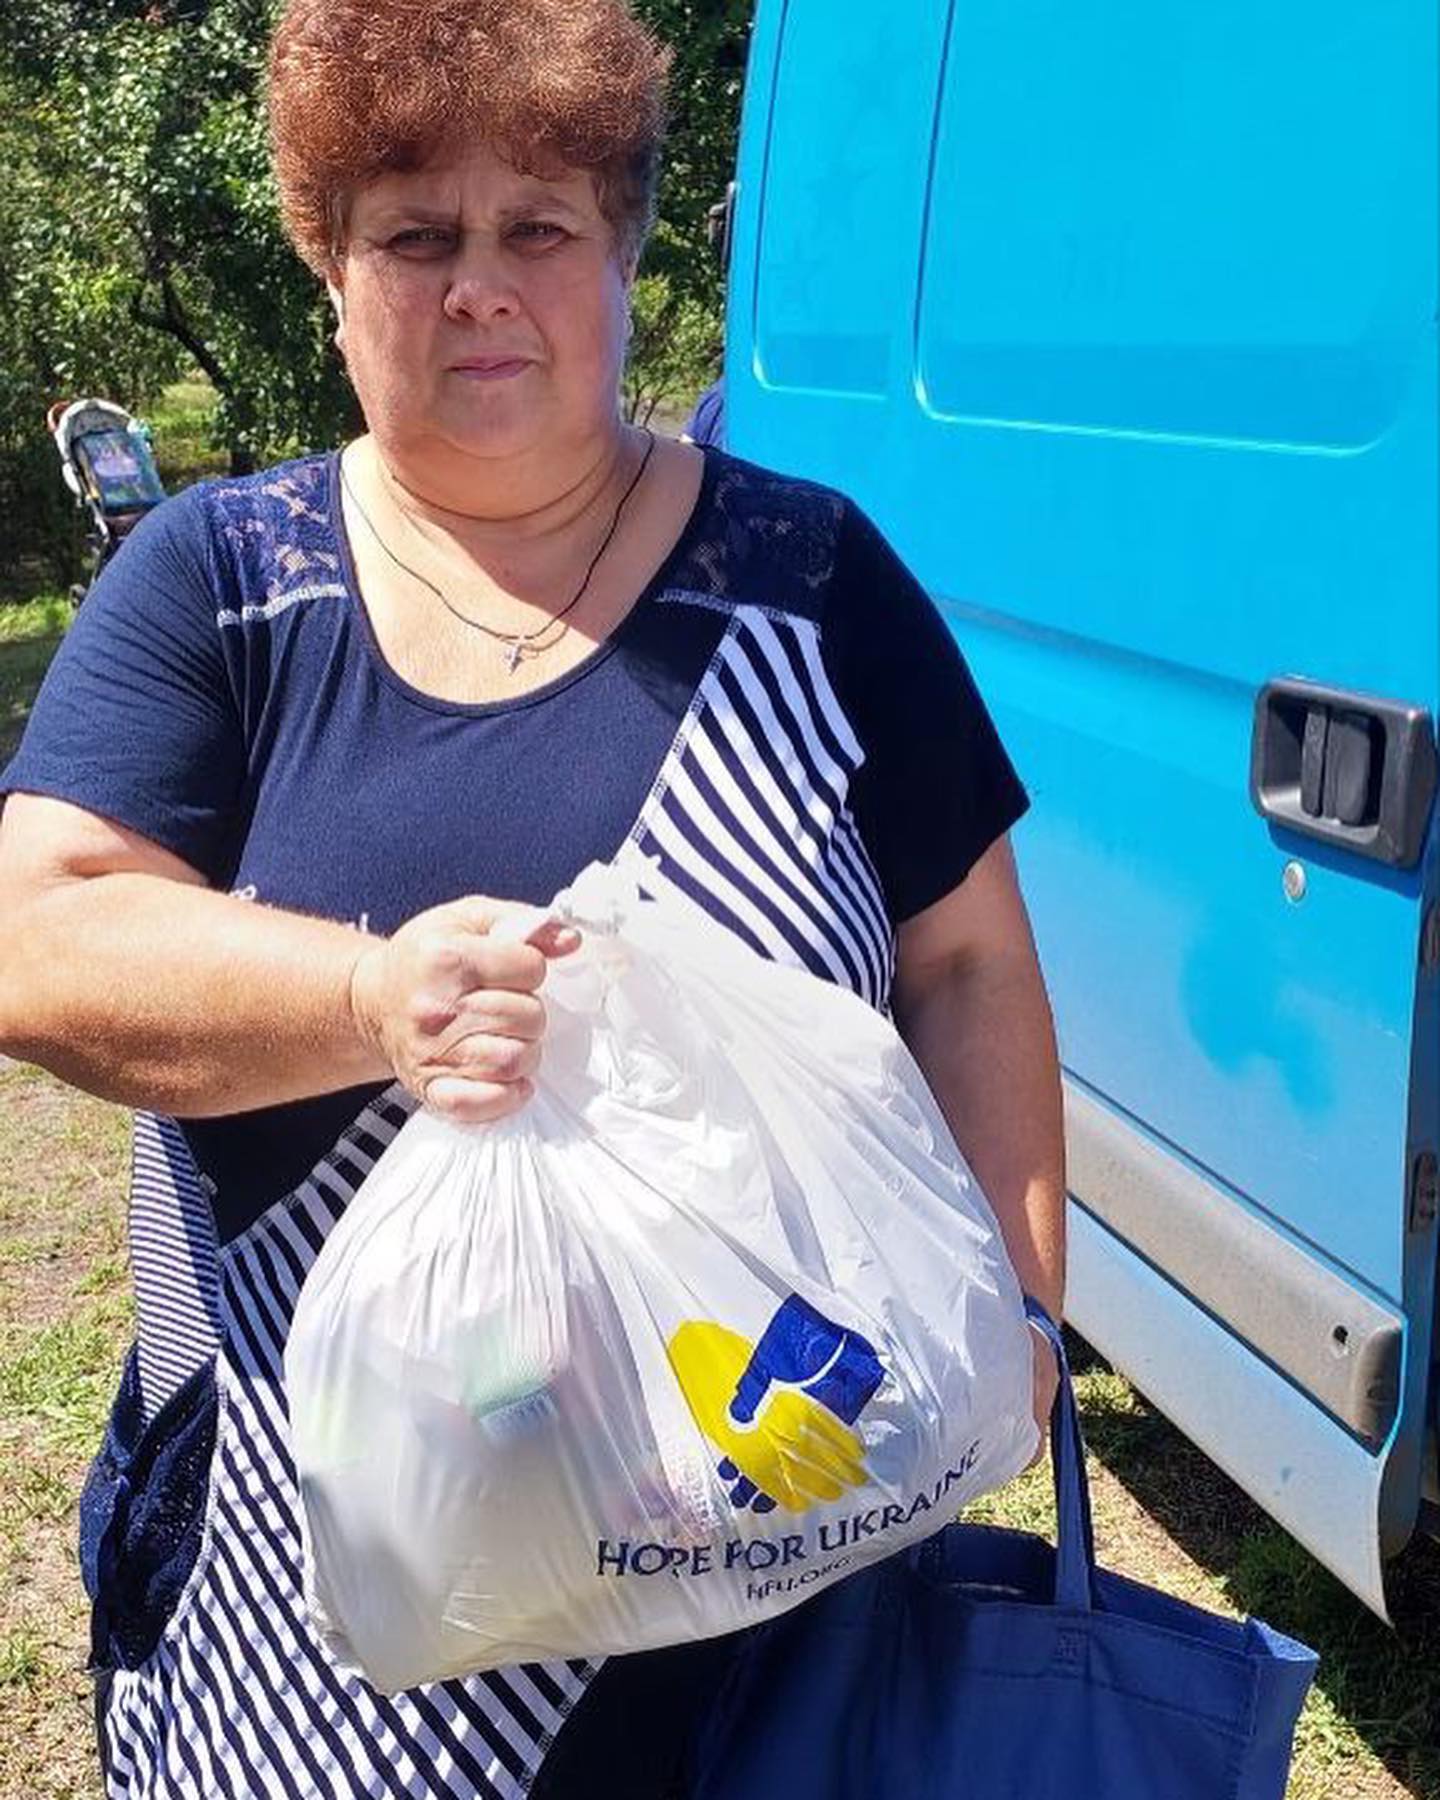 A woman holding a bag of groceries in front of a van.